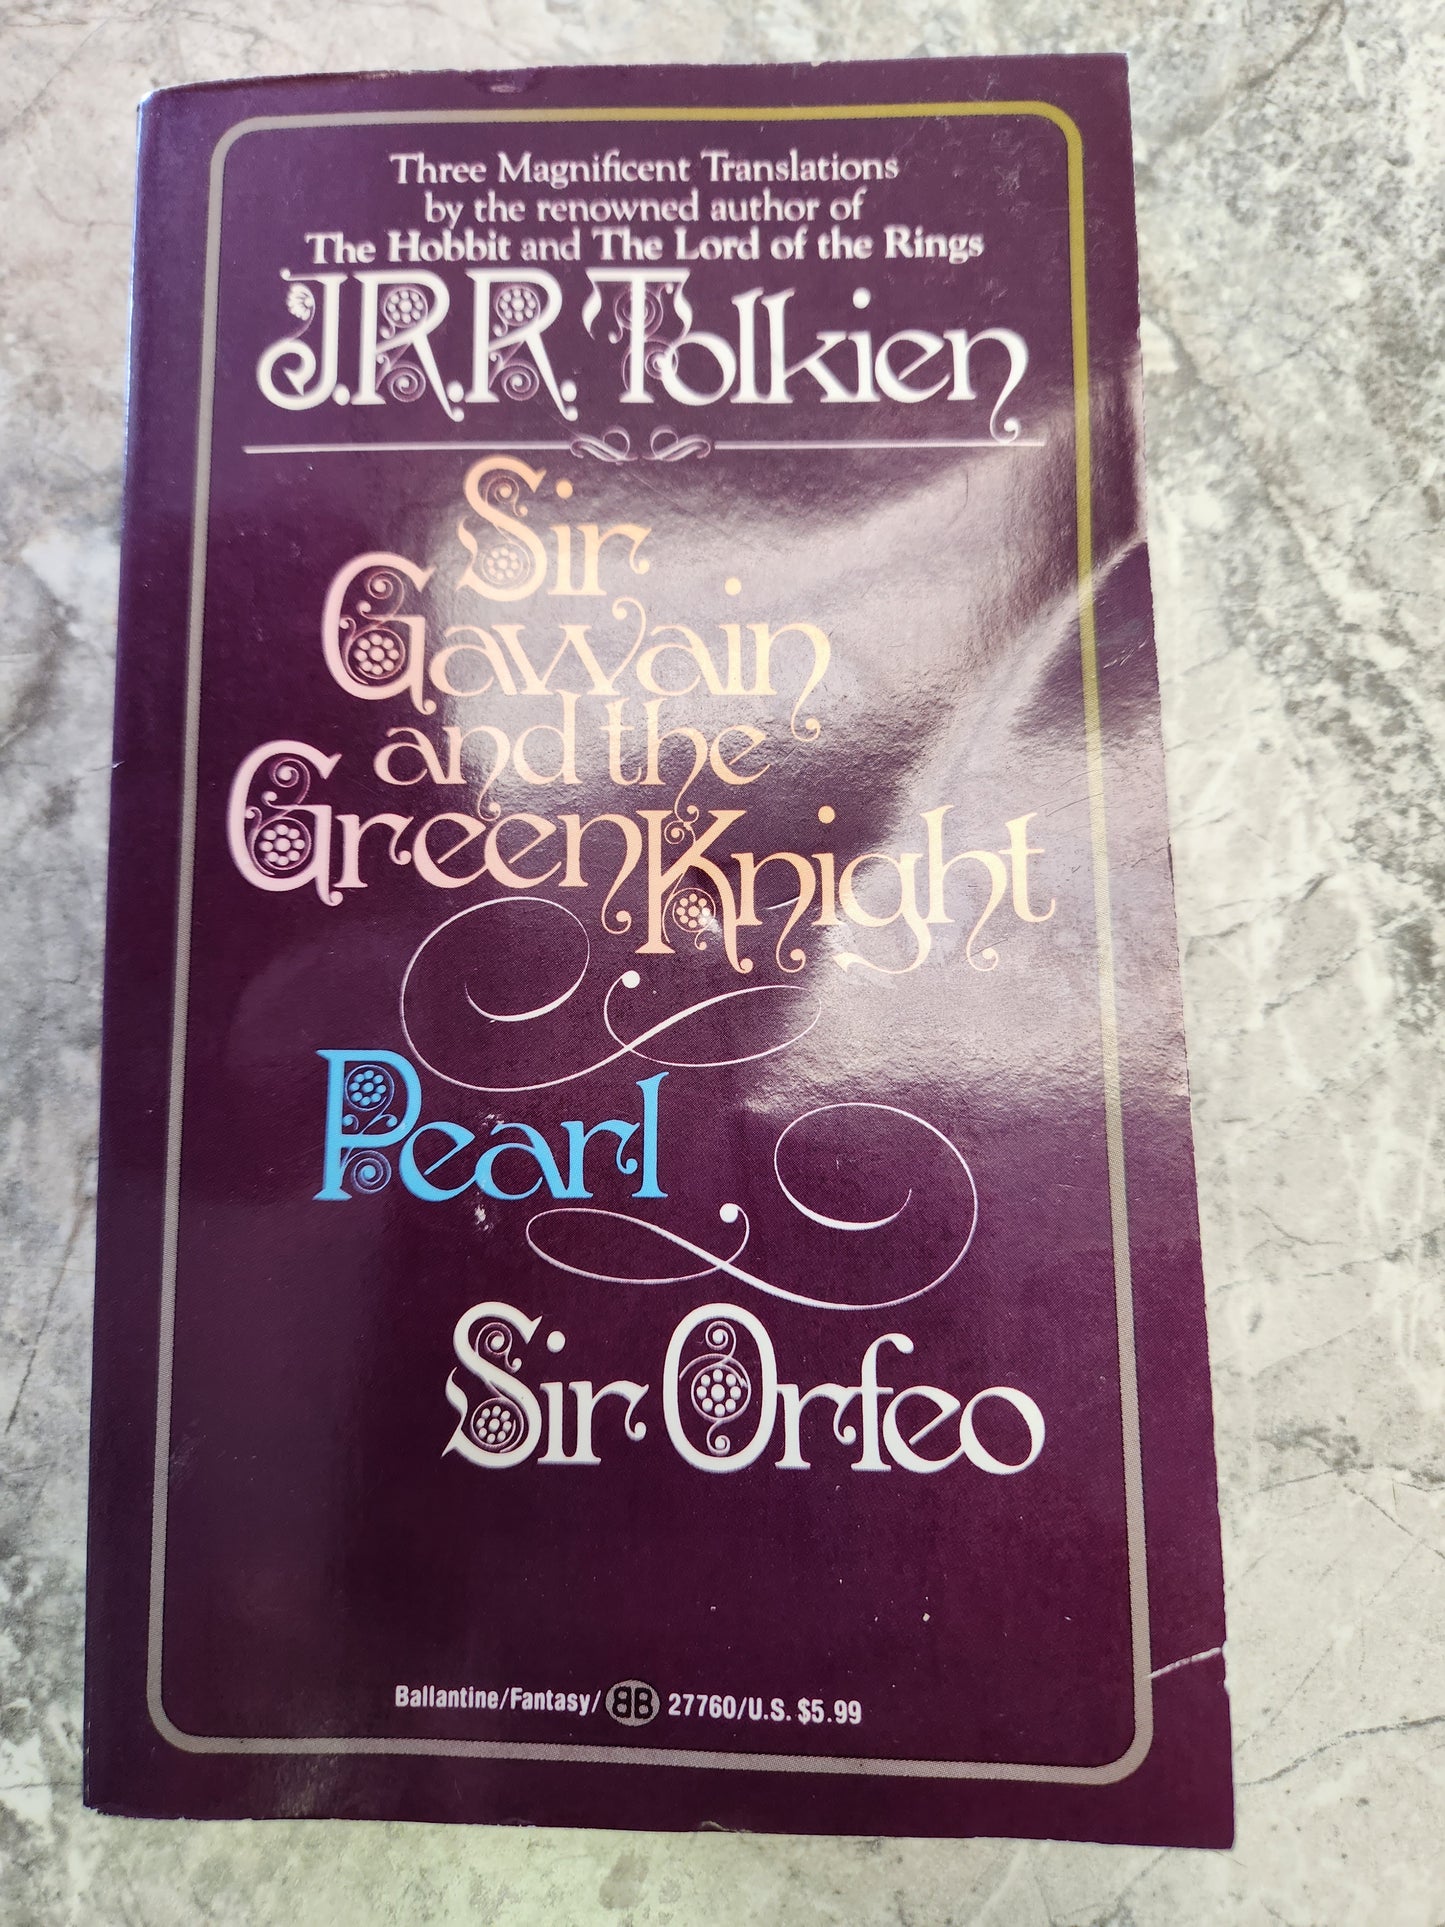 "Sir Gawain and the Green Knight", "Pearl", "Sir Orfeo" Translated by J.R.R. Tolkien - Dead Tree Dreams Bookstore